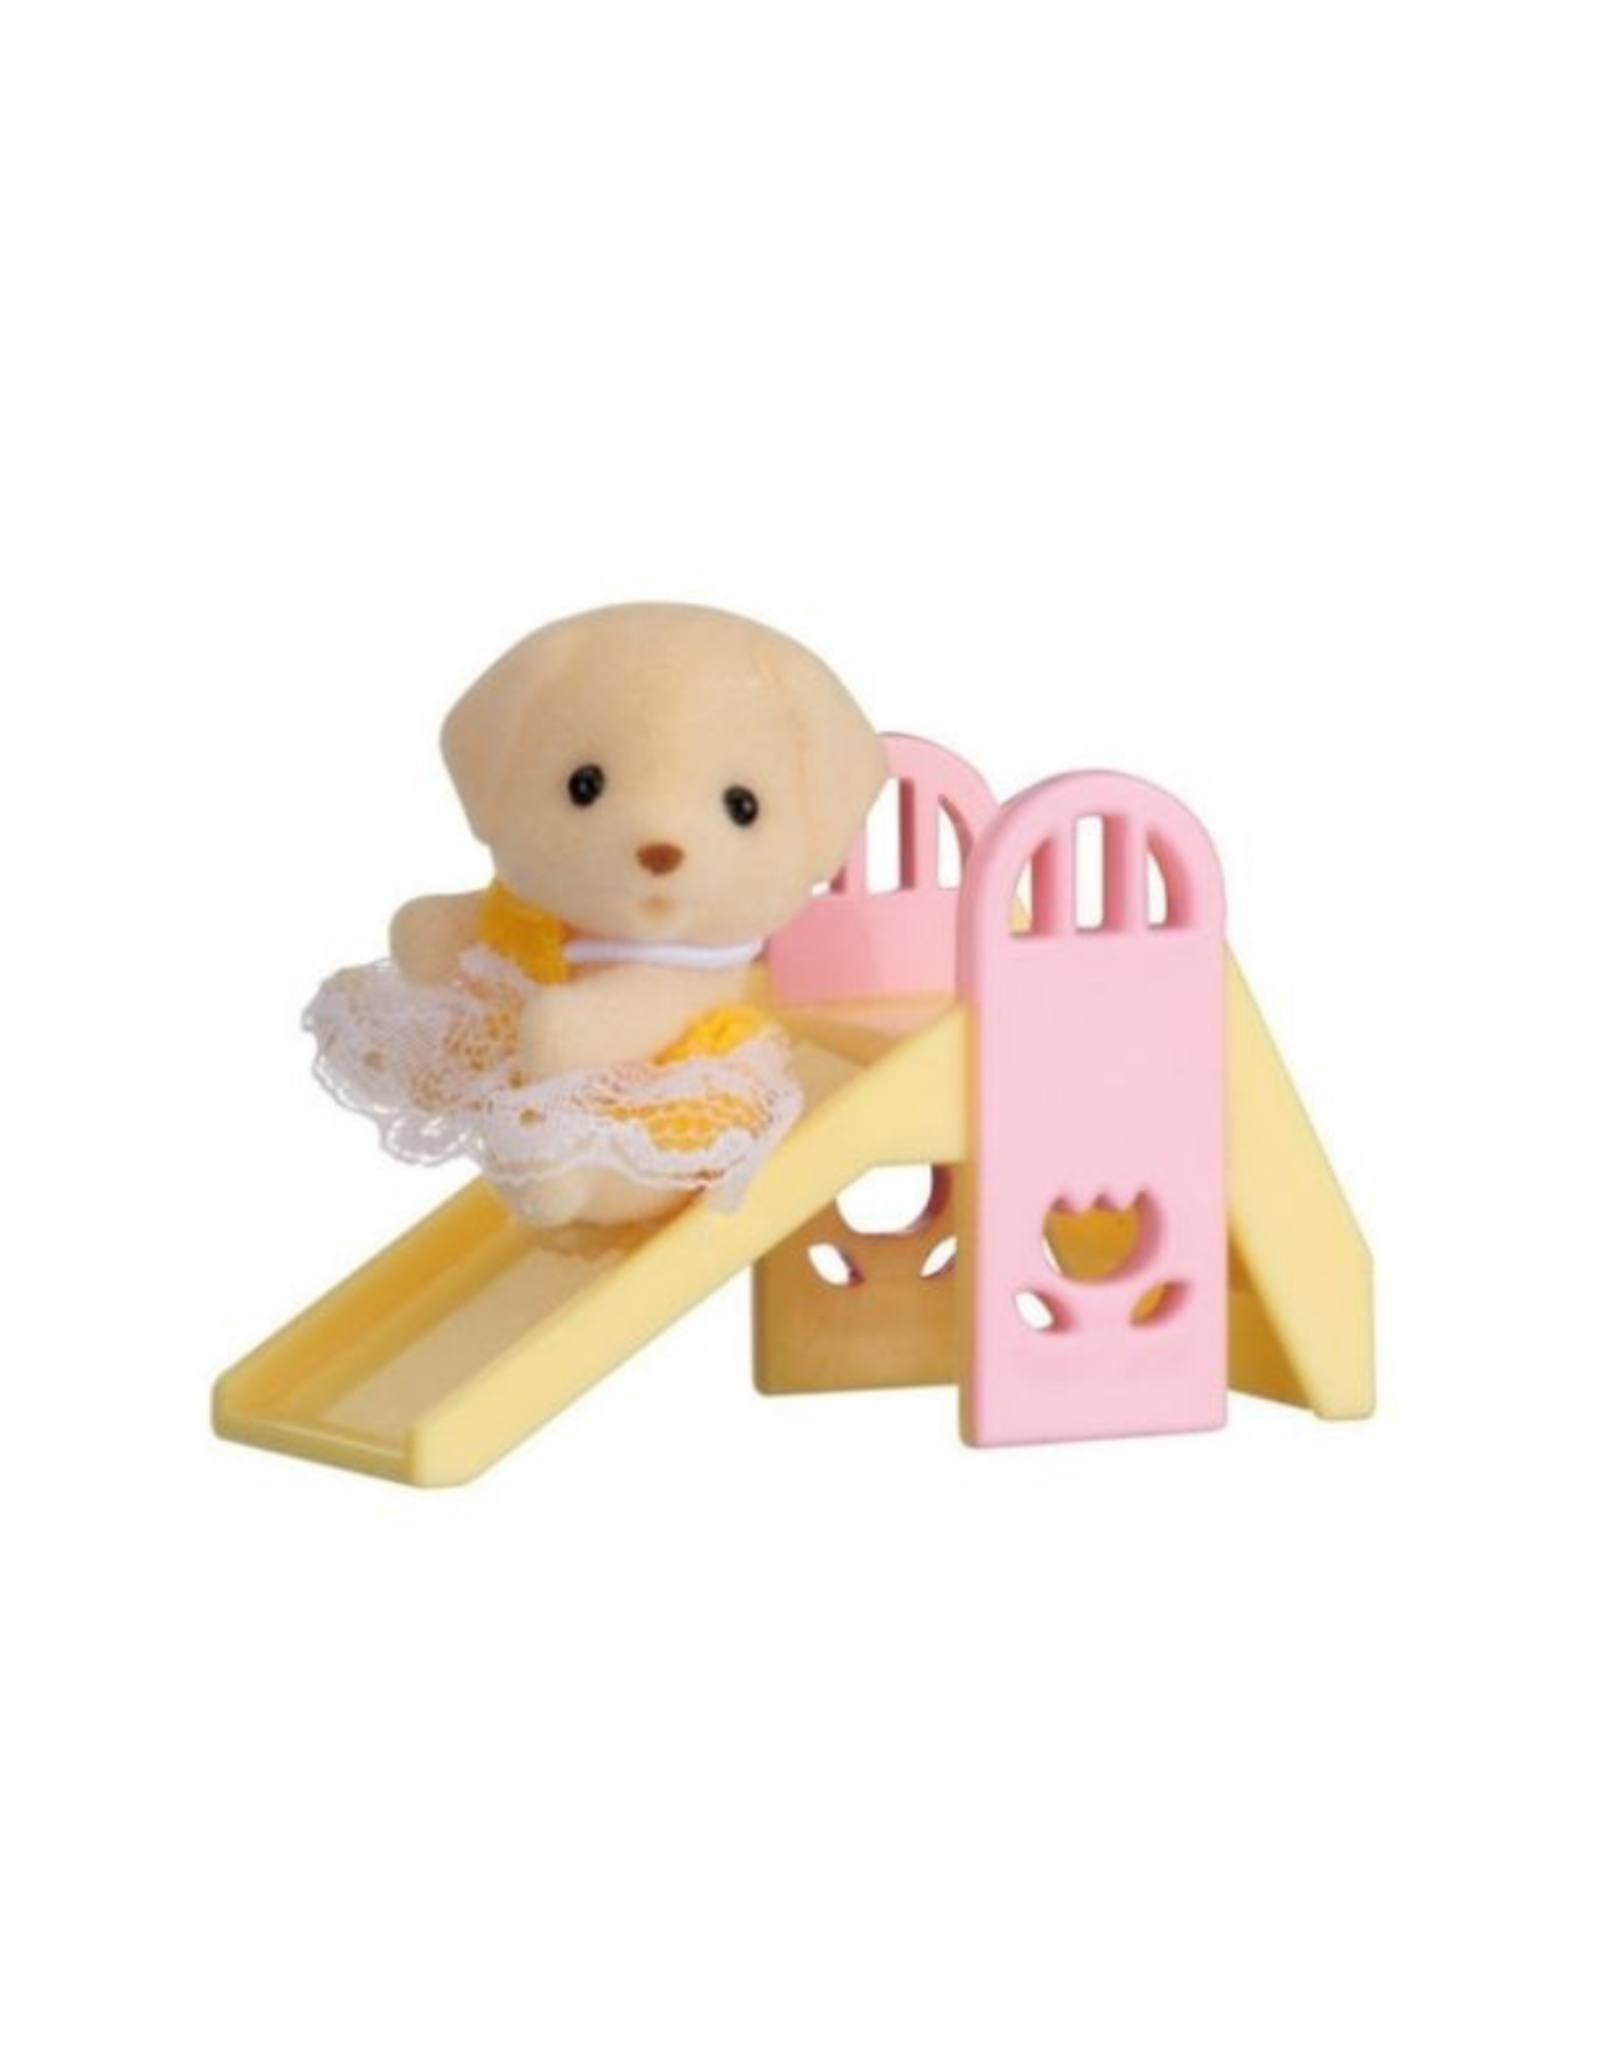 Calico Critters Mini Carrying Case - Baby Puppy on a Slide